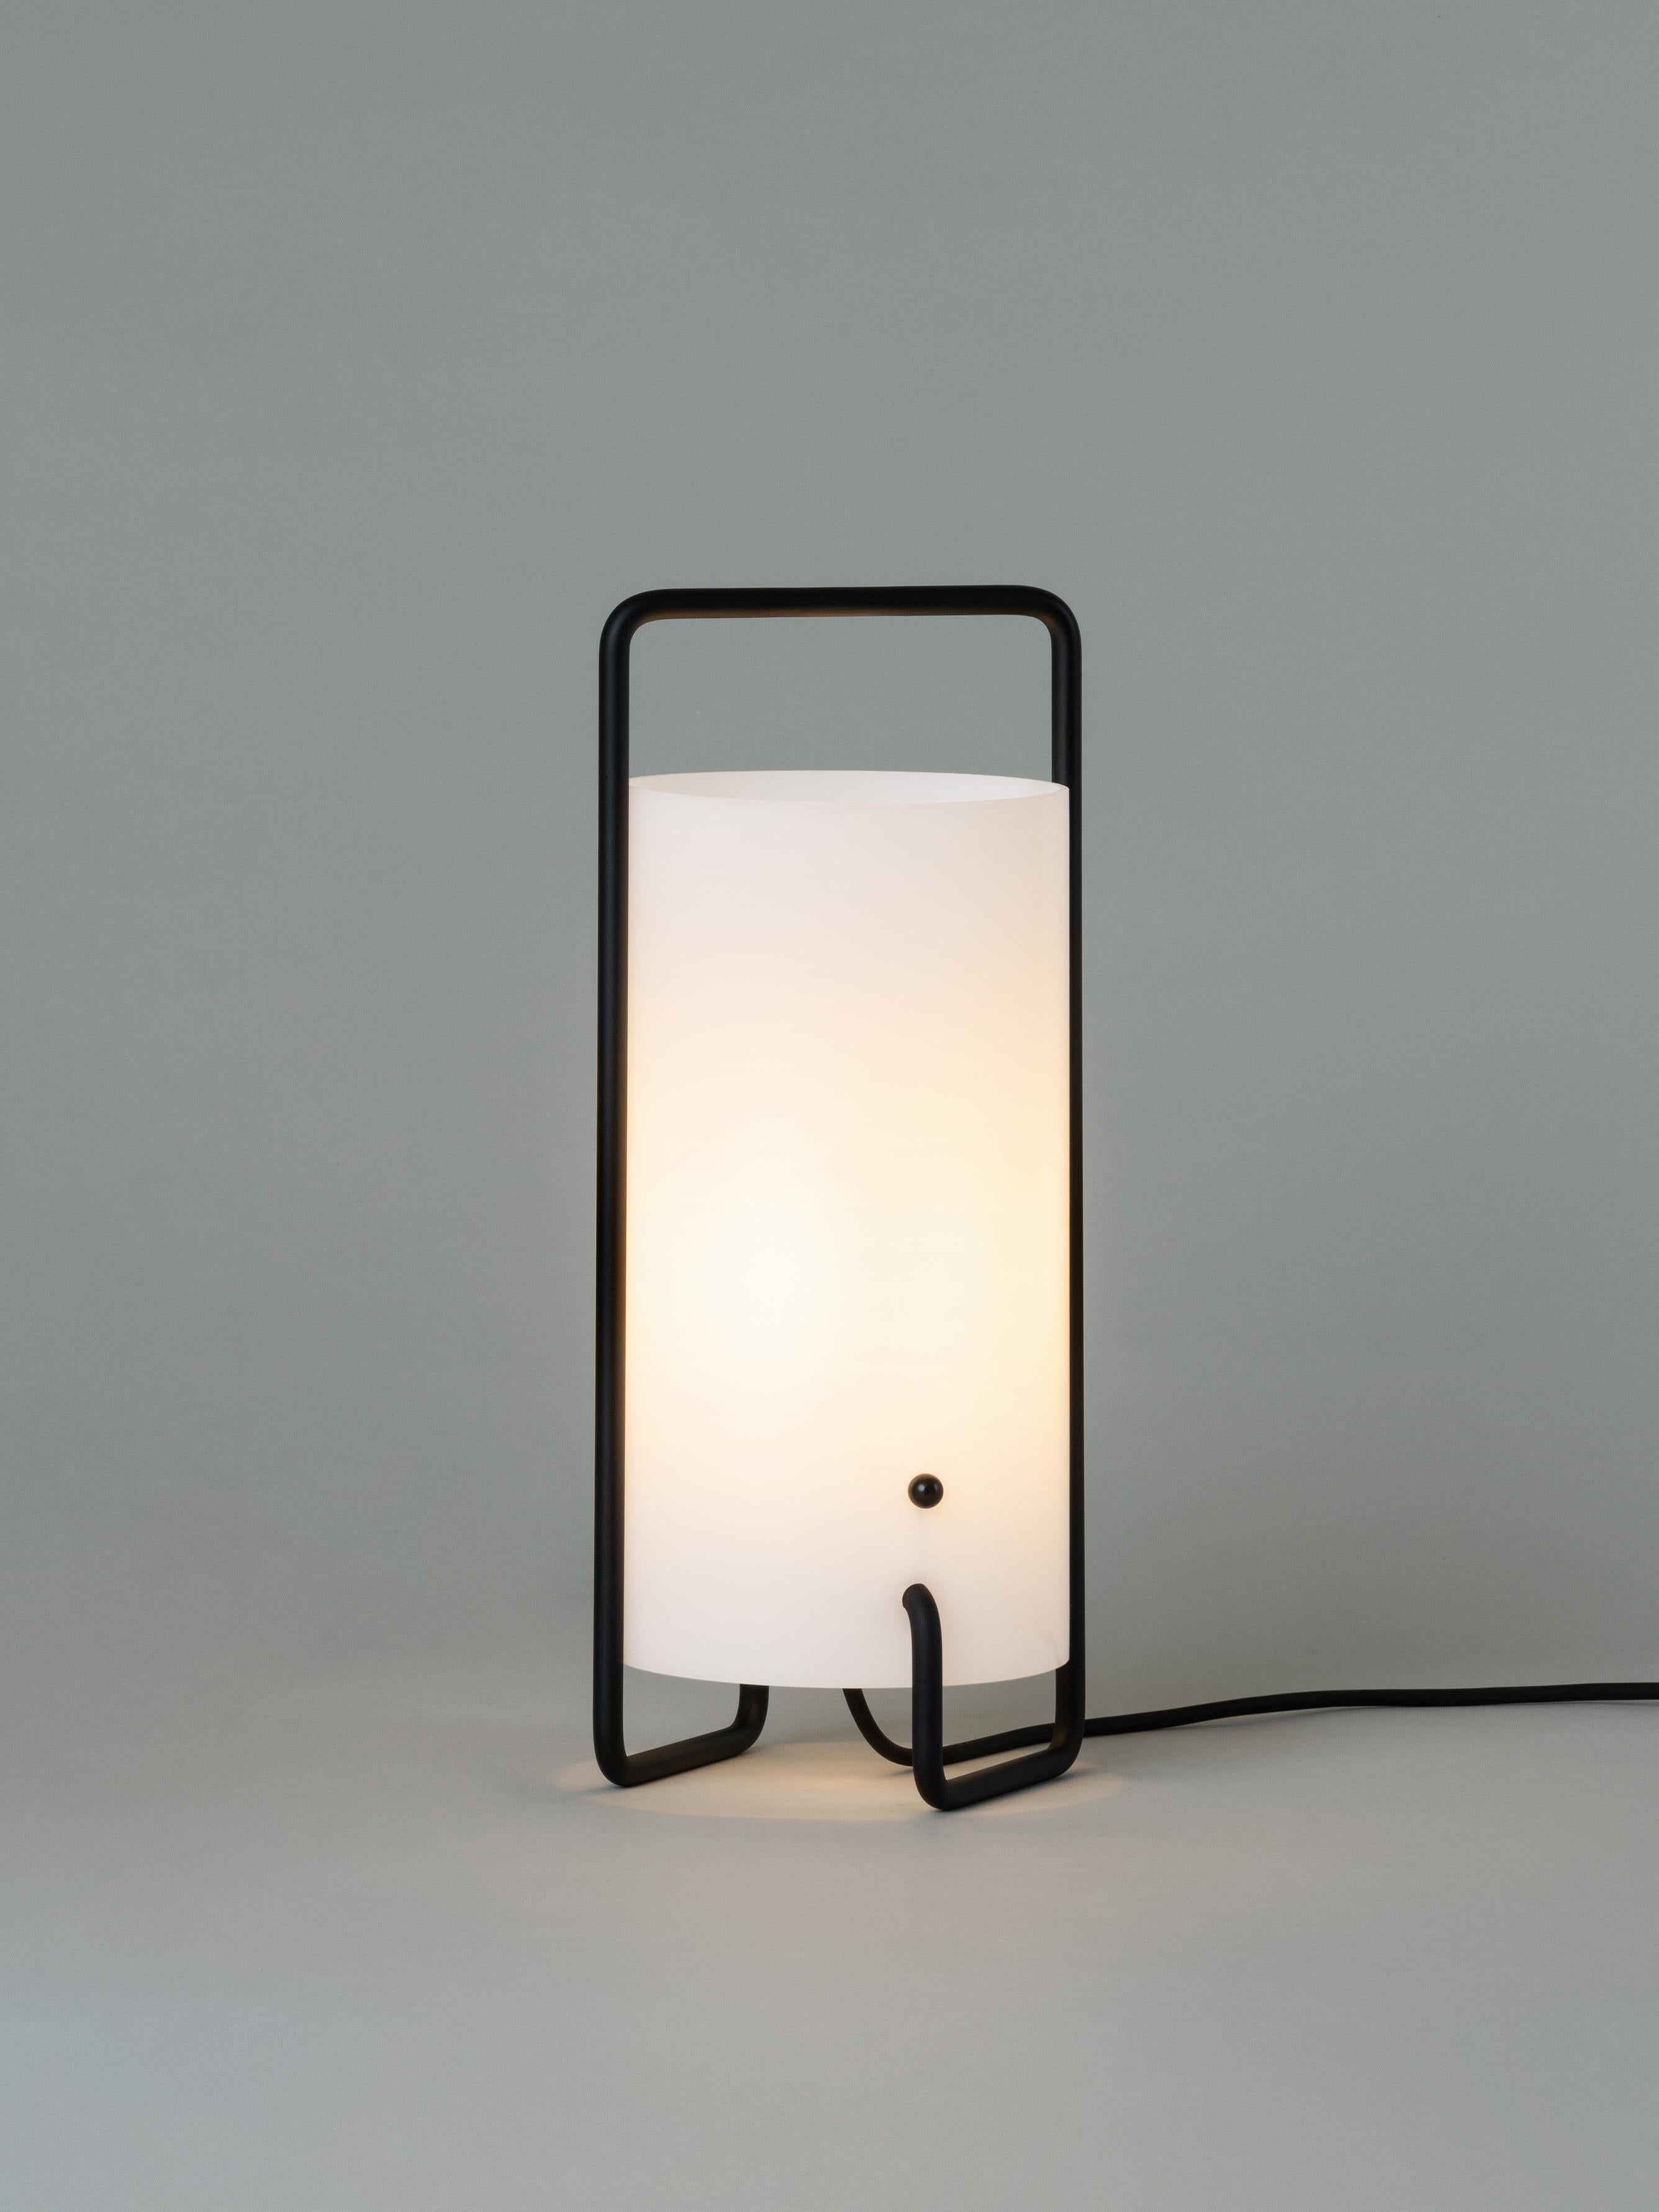 Black Asa table lamp by Miguel Milá
Dimensions: D 15 x H 41 cm
Materials: Metal, methacrylate shade.

Asa is built of an ingenious, single, continuous tube structure which also defines the upper, handle-shaped structure for carrying. It has two